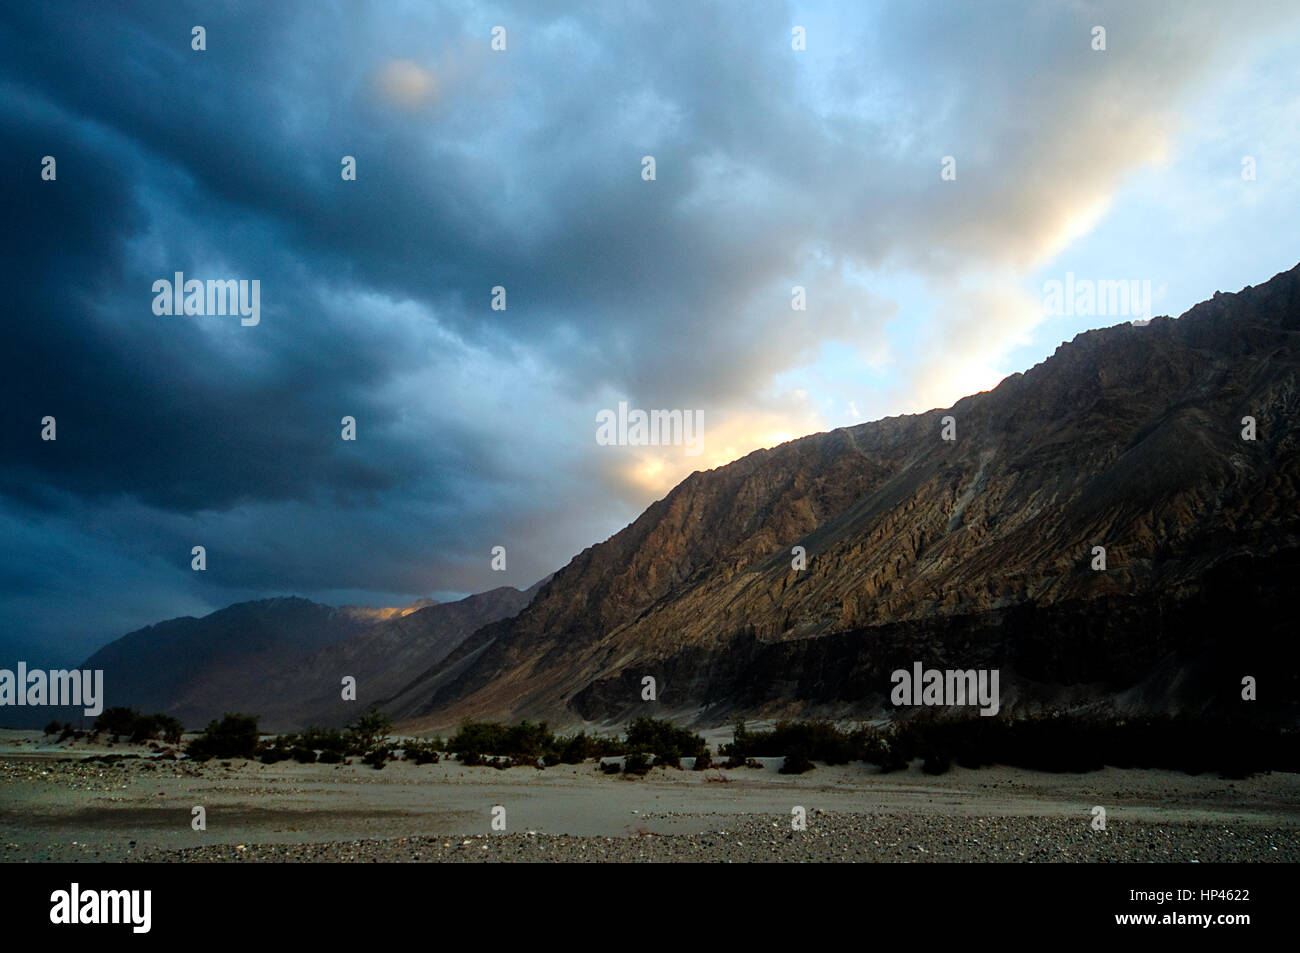 A landscape at evening in Nubra Valley, Ladakh, India with dramatic clouds and light play Stock Photo